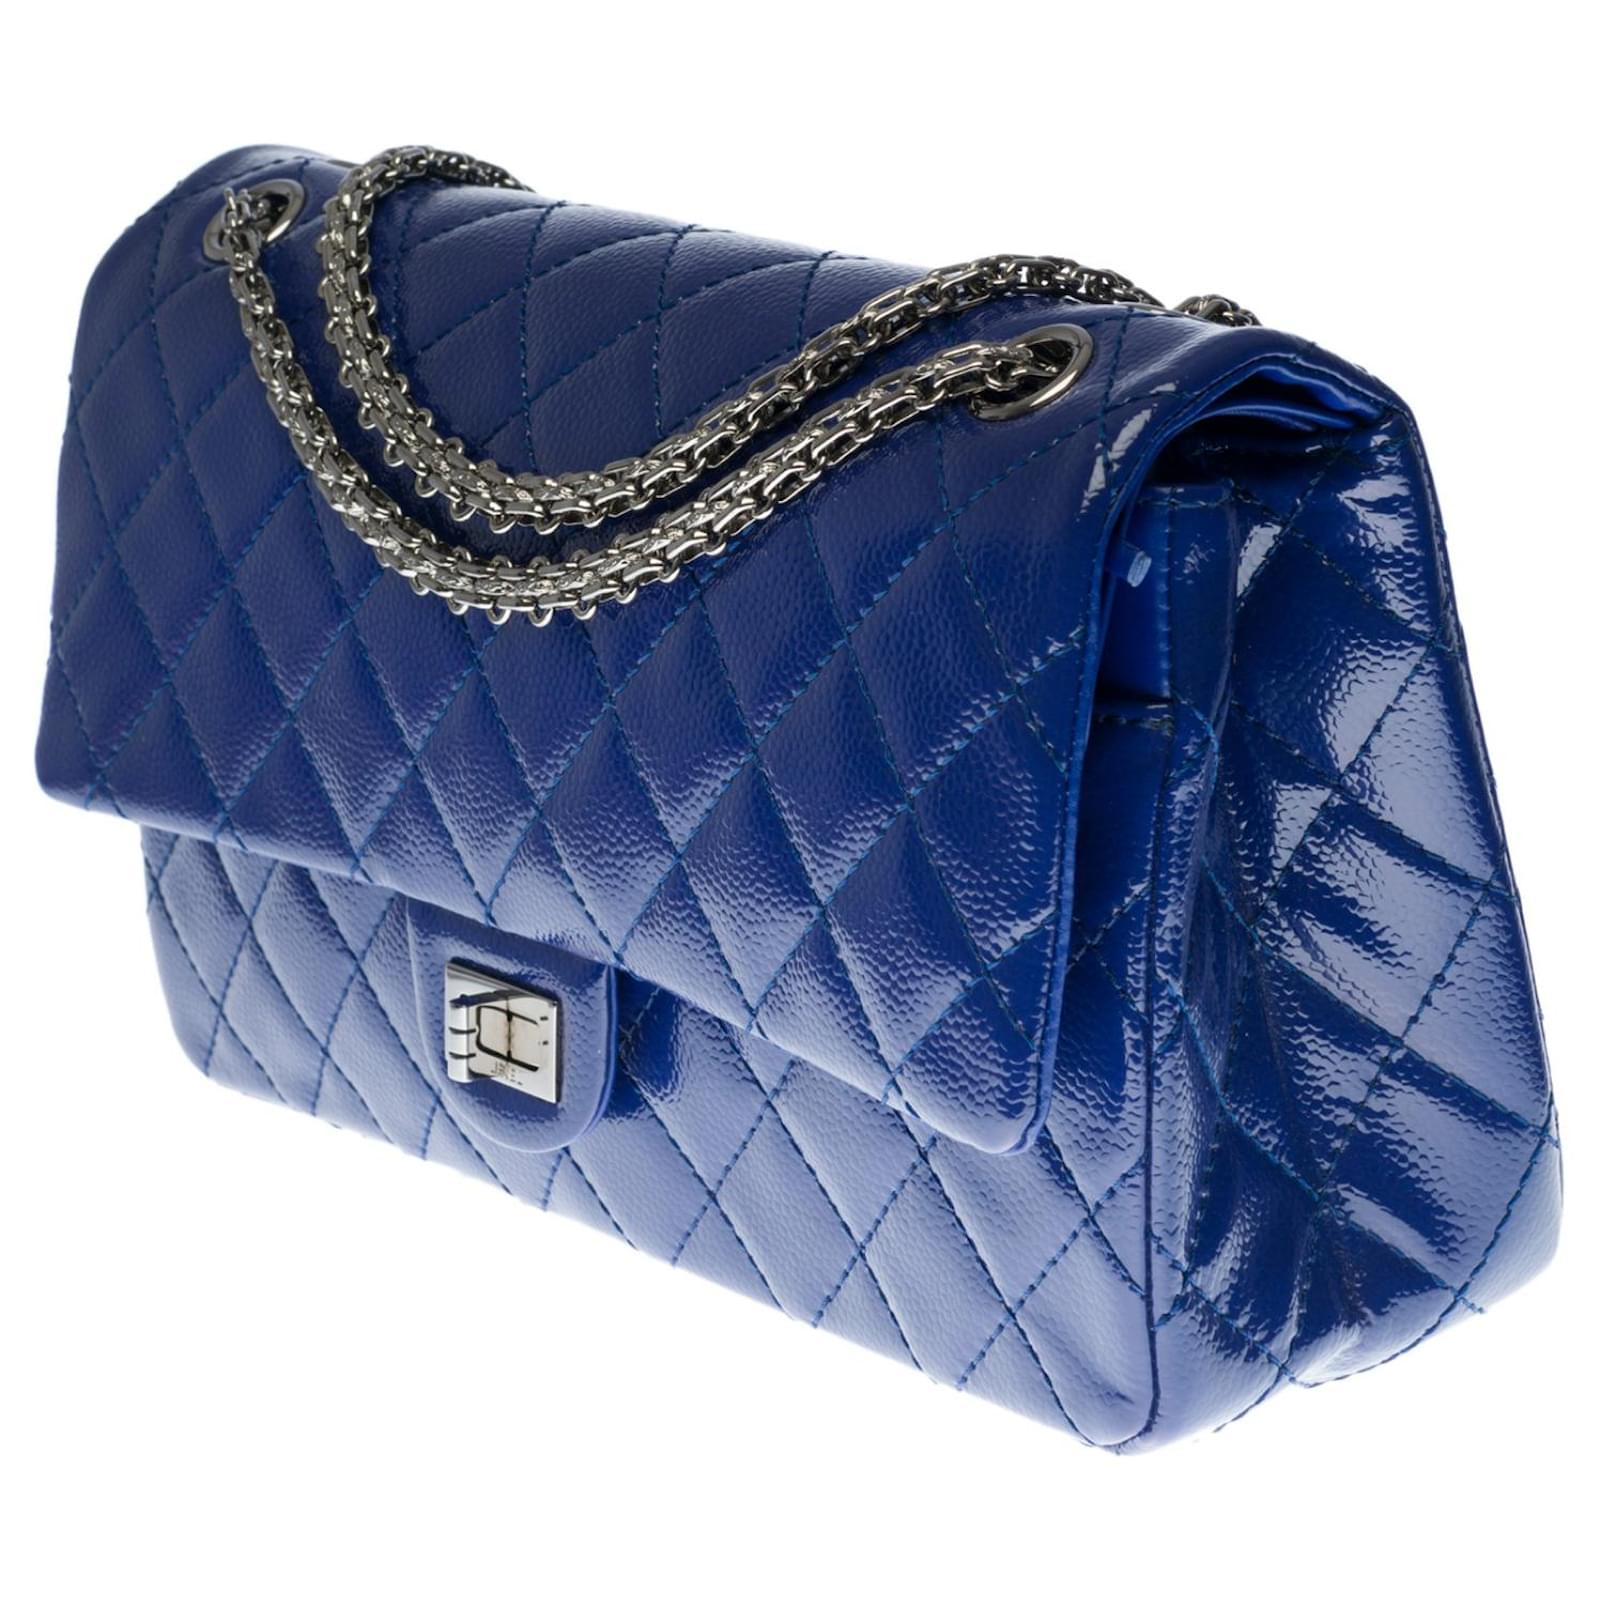 Splendid Chanel handbag 2.55 Classic electric blue quilted patent